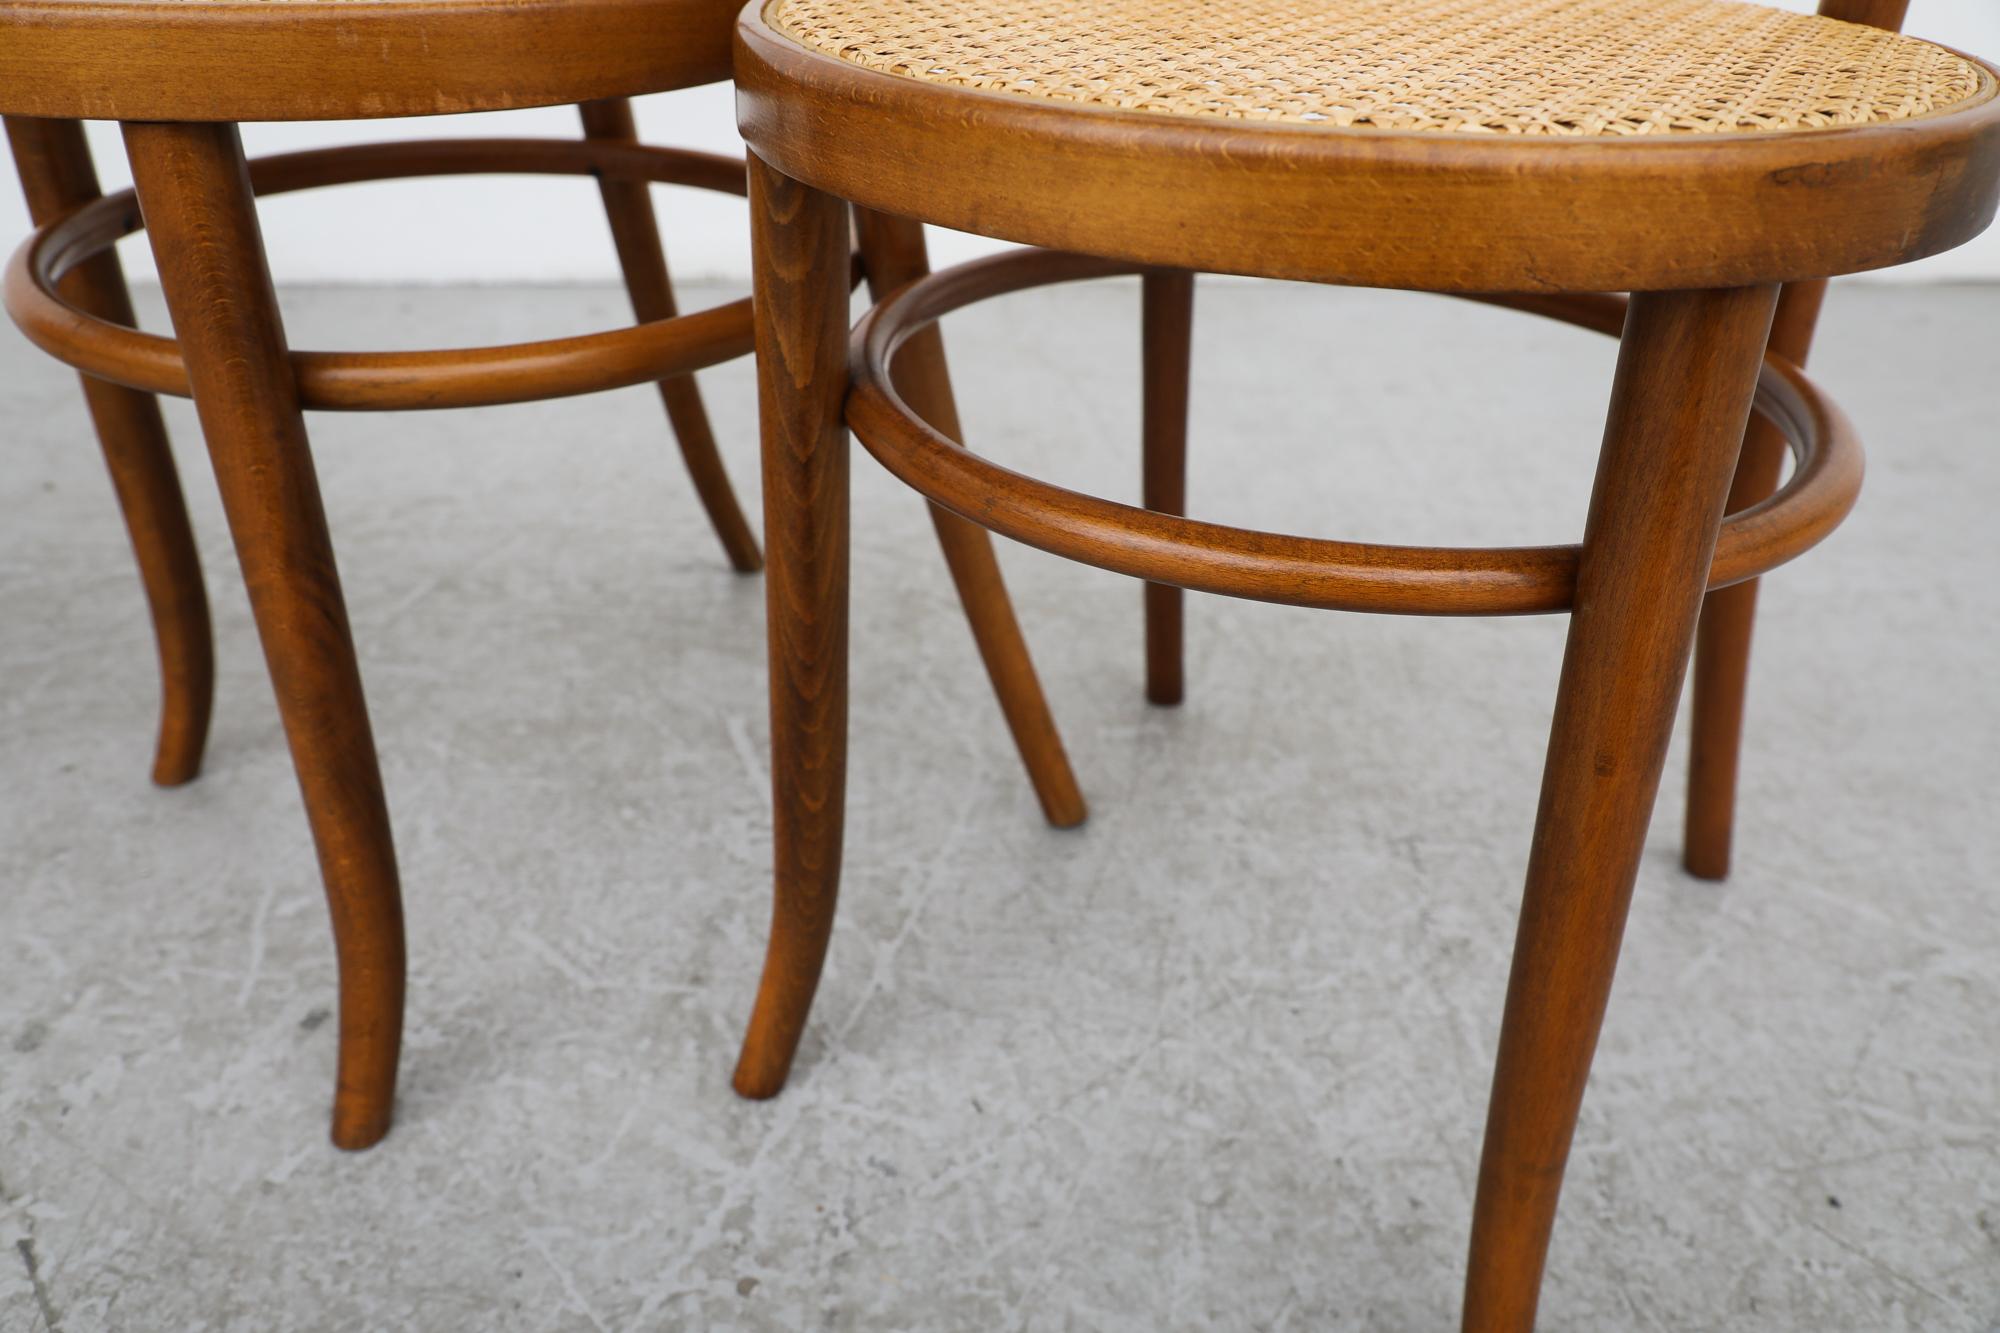 Vintage Thonet No. 14 Bentwood and Cane Café Side Chairs with Cane Seats For Sale 7